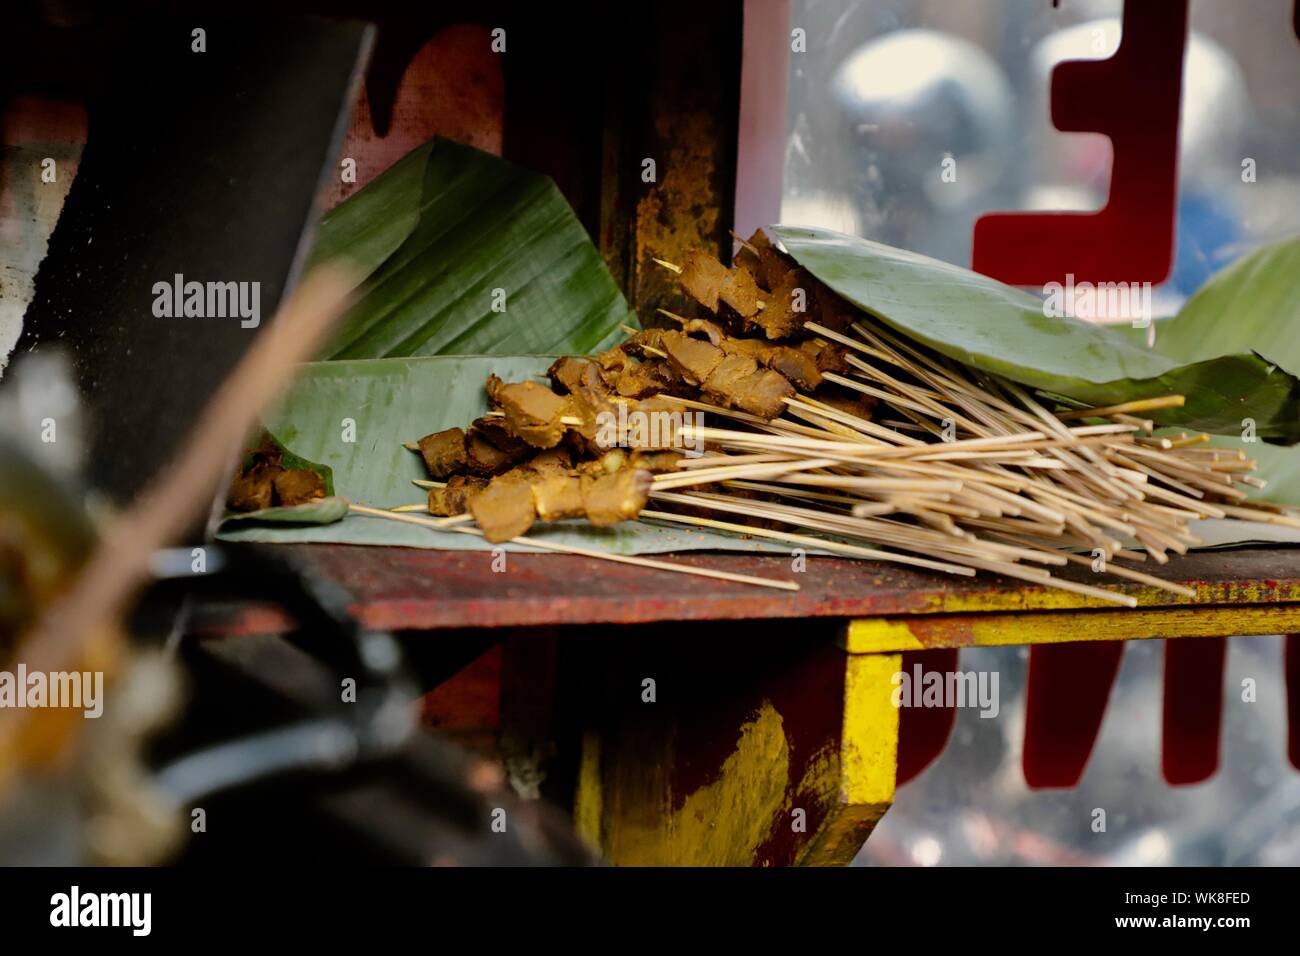 Sate Padang. Beef satay from Padang, West Sumatra. Half-cooked satay on shelf ready to be grilled. Stock Photo